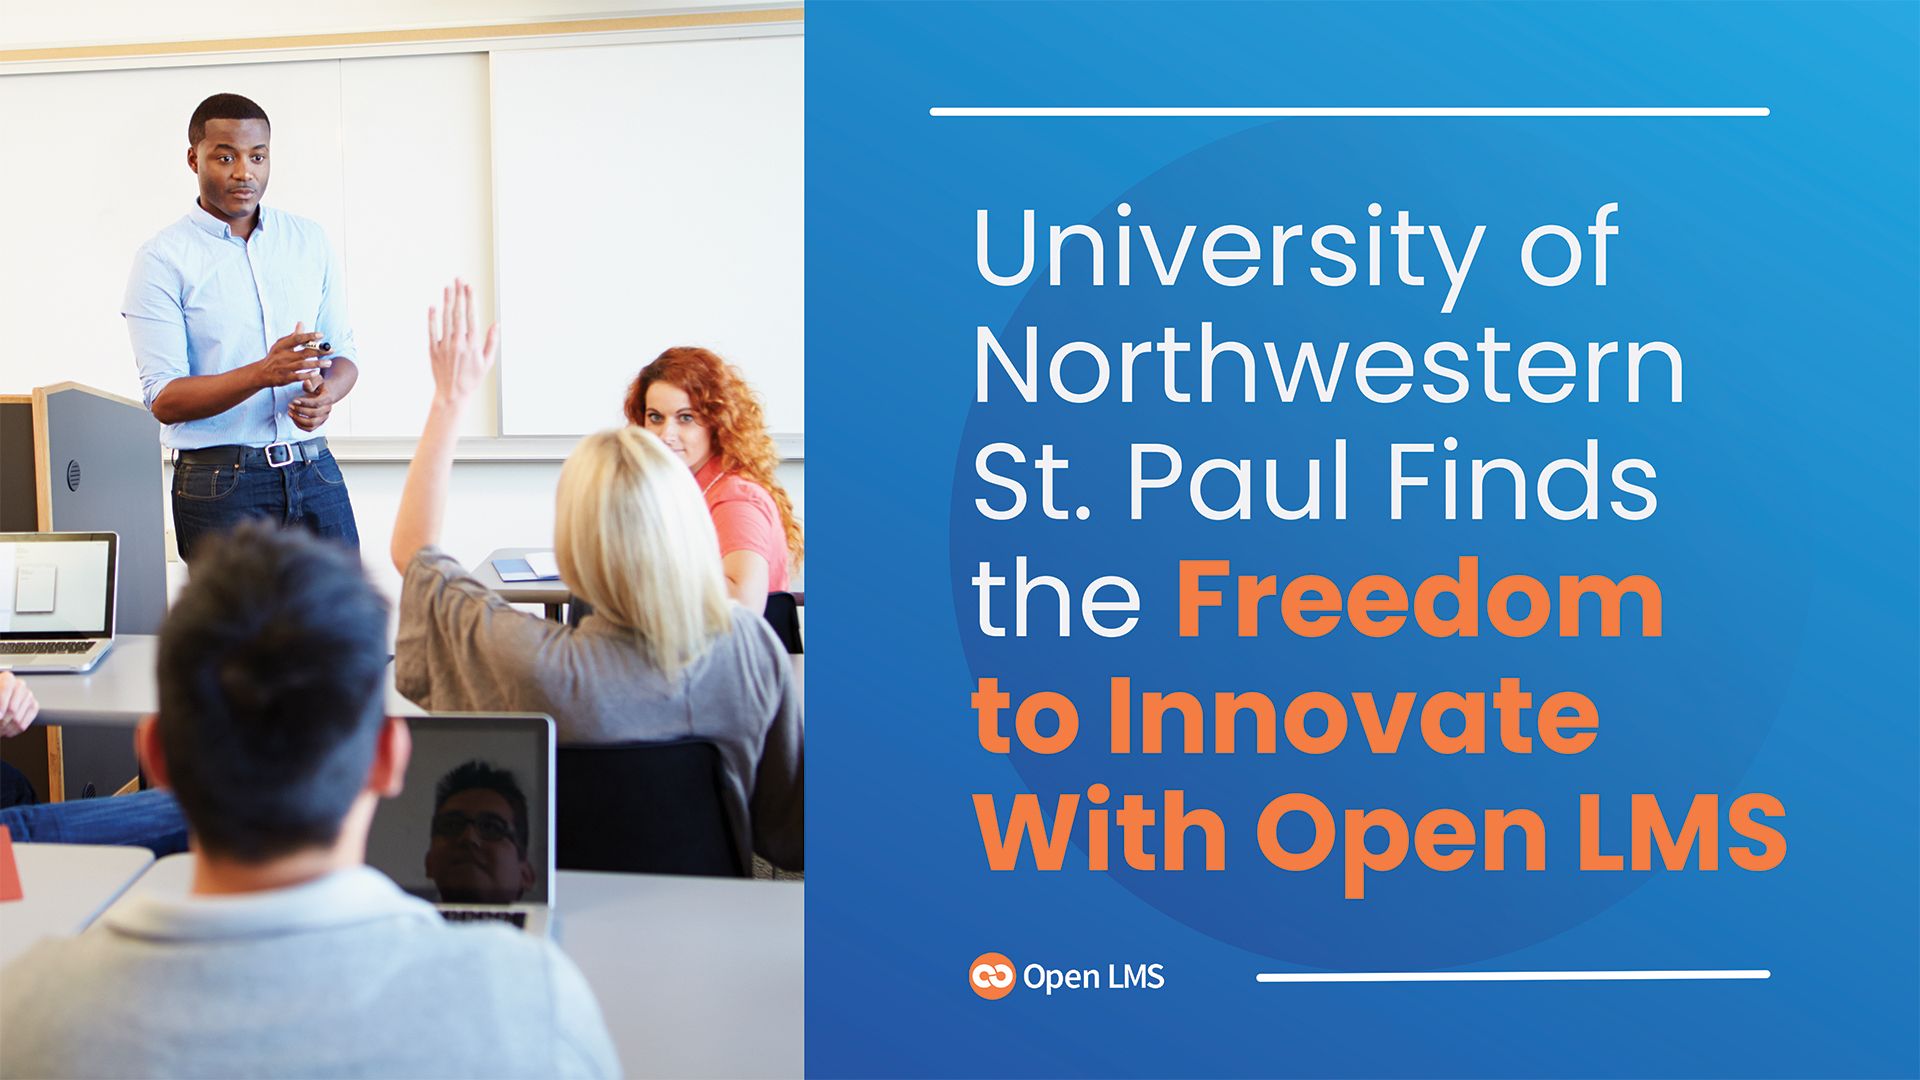 University of Northwestern St Paul Finds the Freedom to Innovate With